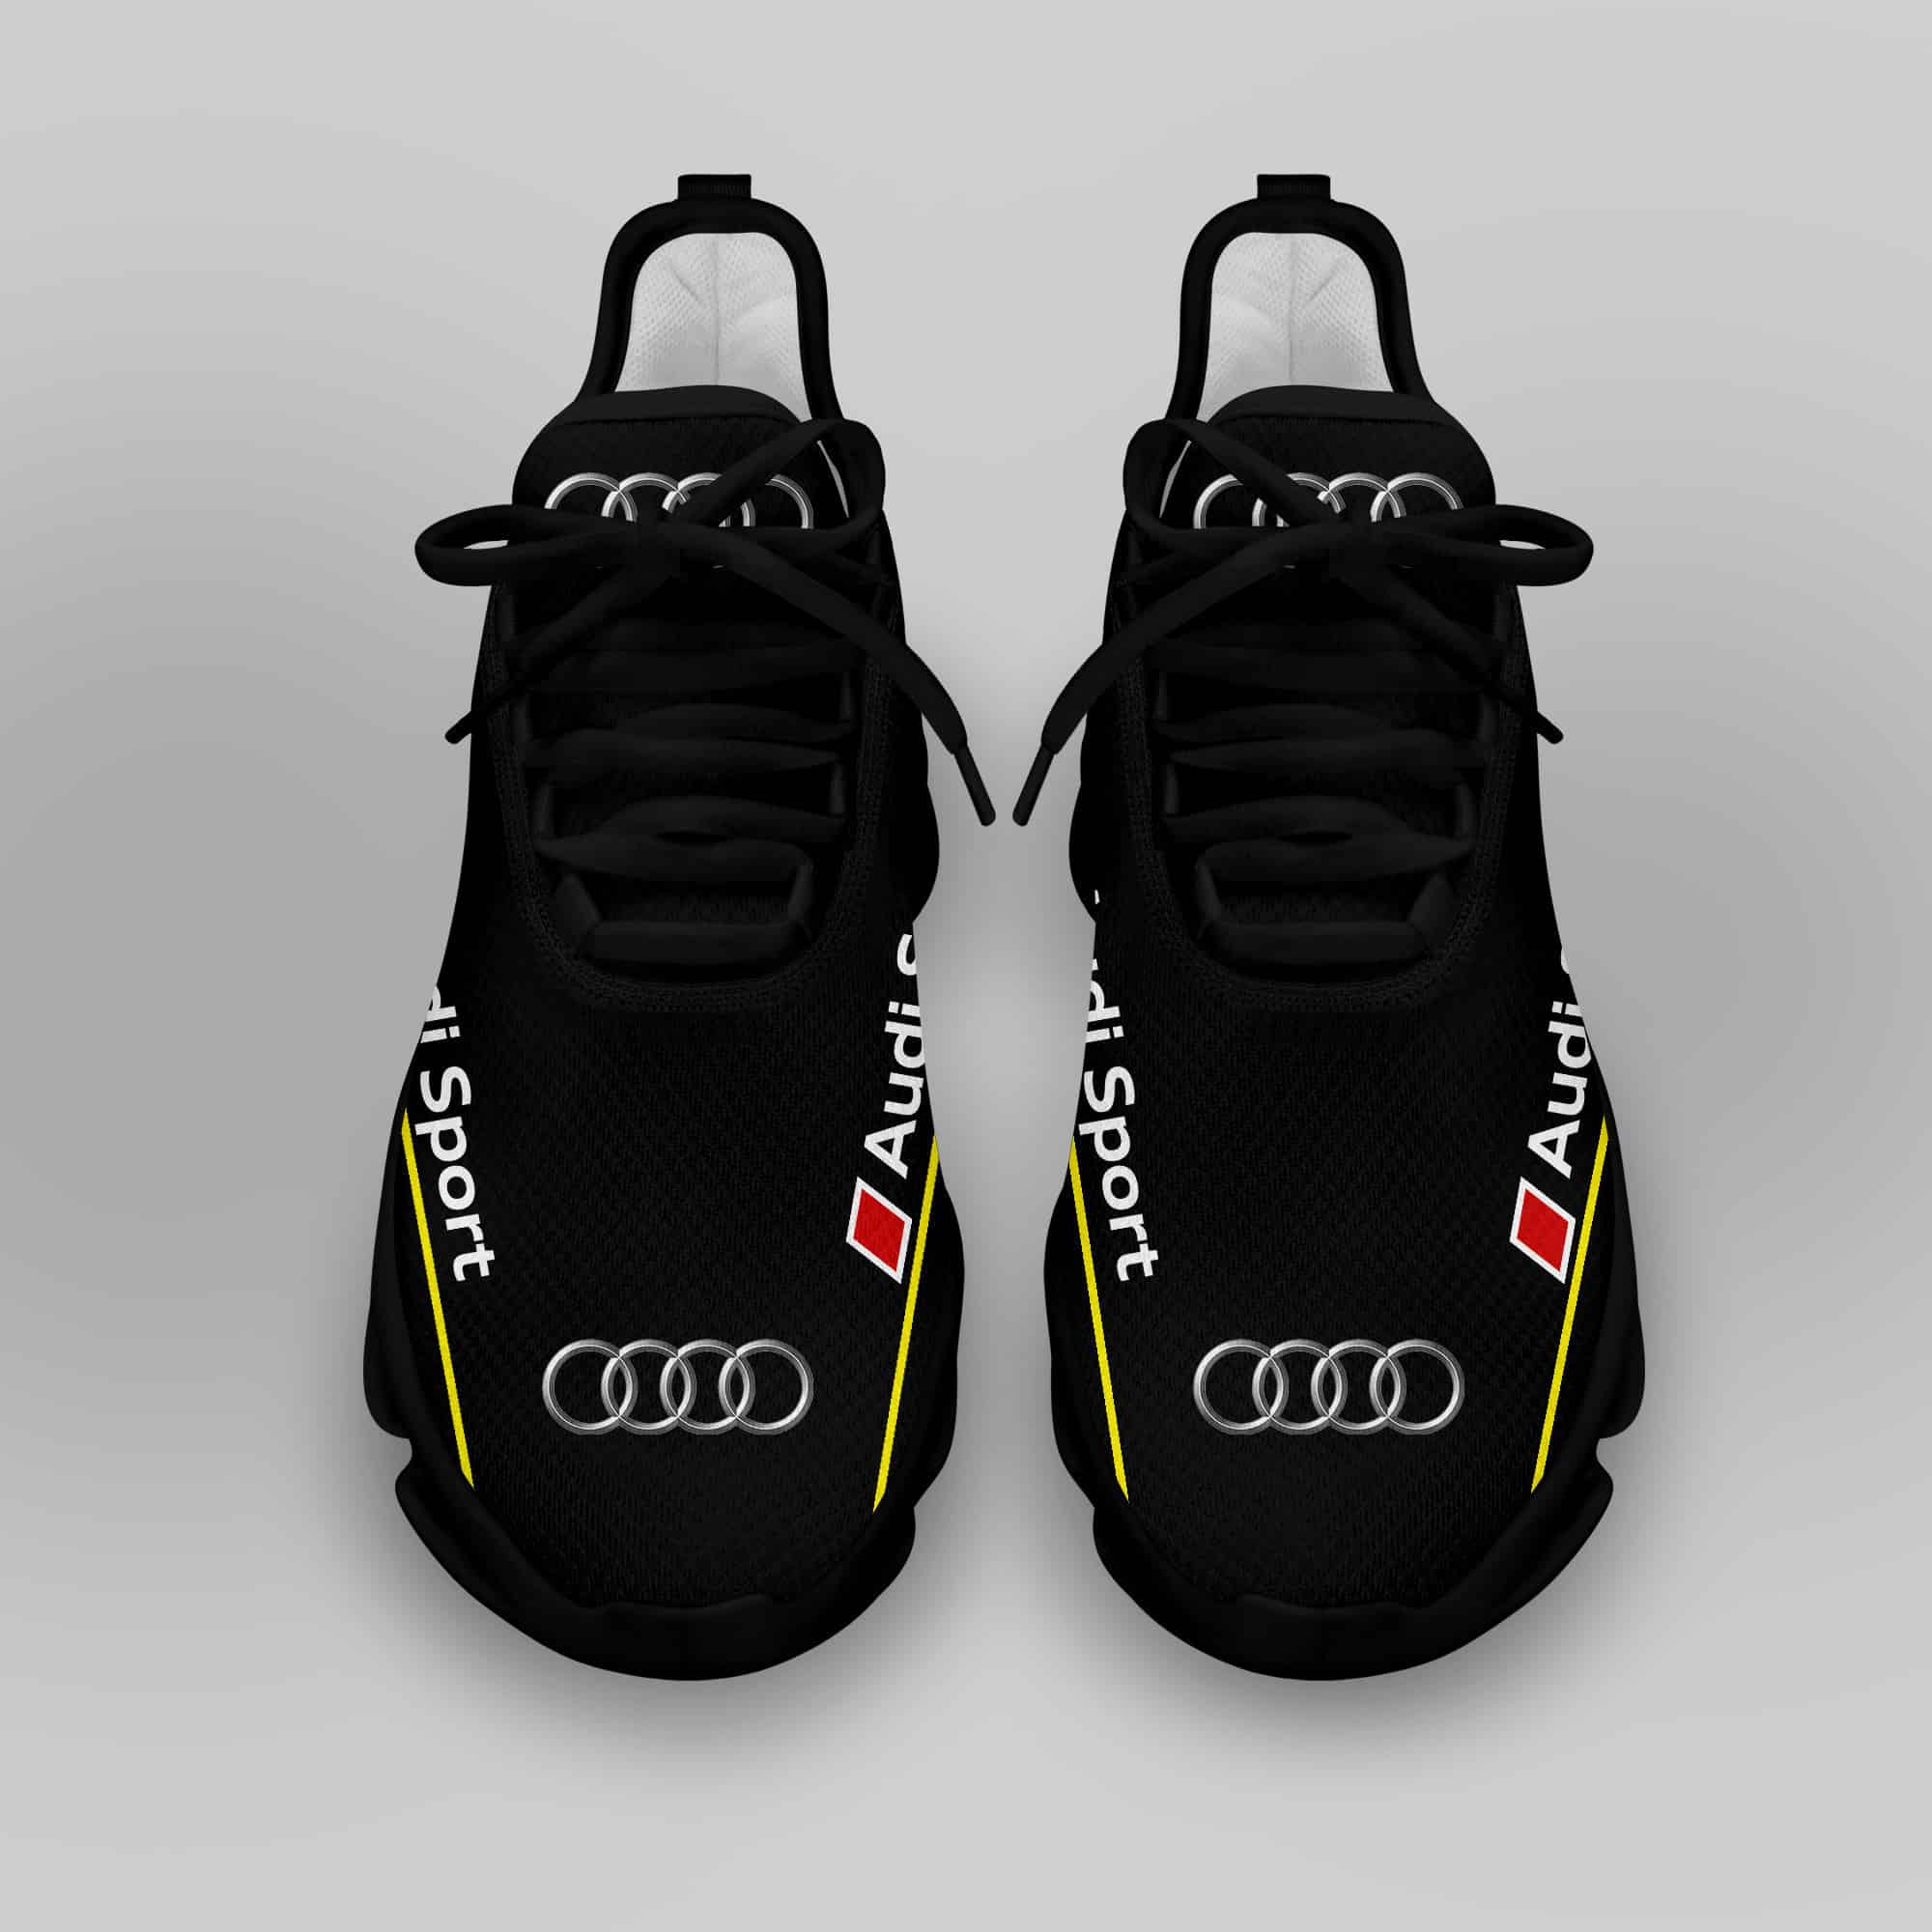 Audi Sport Running Shoes Max Soul Shoes Sneakers Ver 39 4